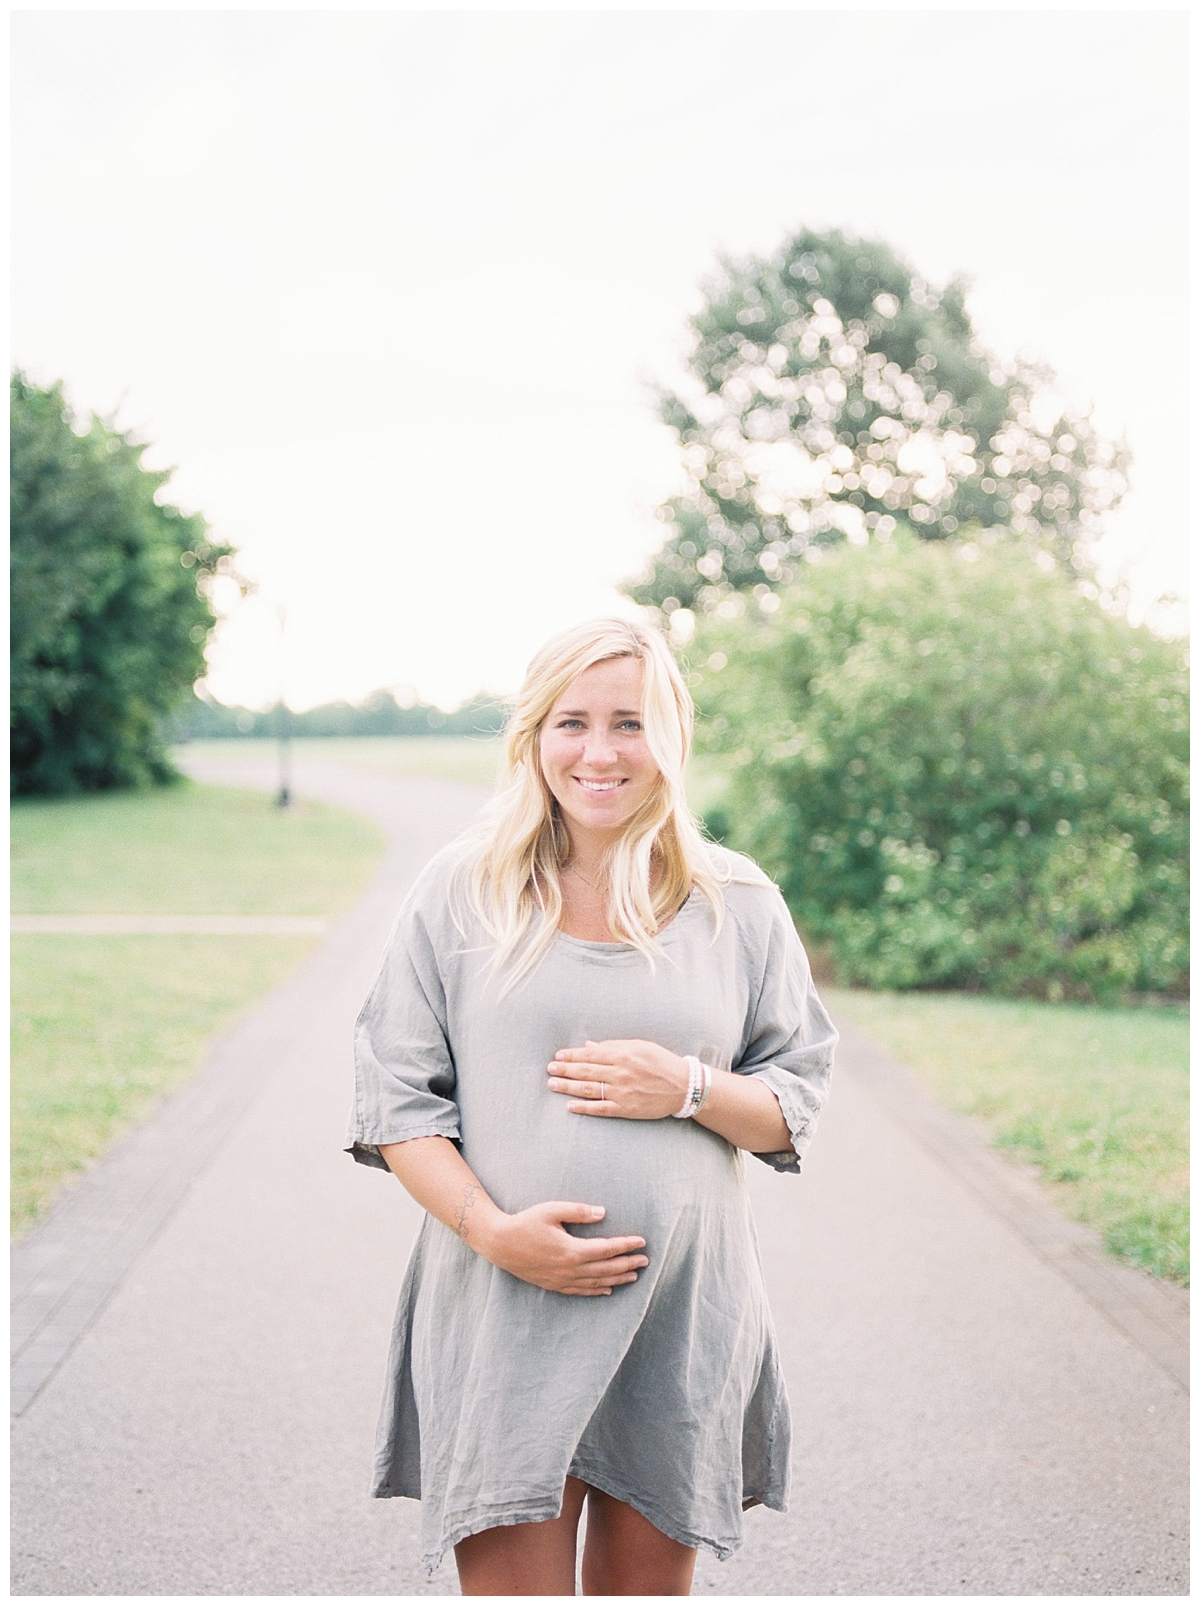 Outdoor Maternity Photo Session in Murfreesboro, TN by Grace Paul Photography.